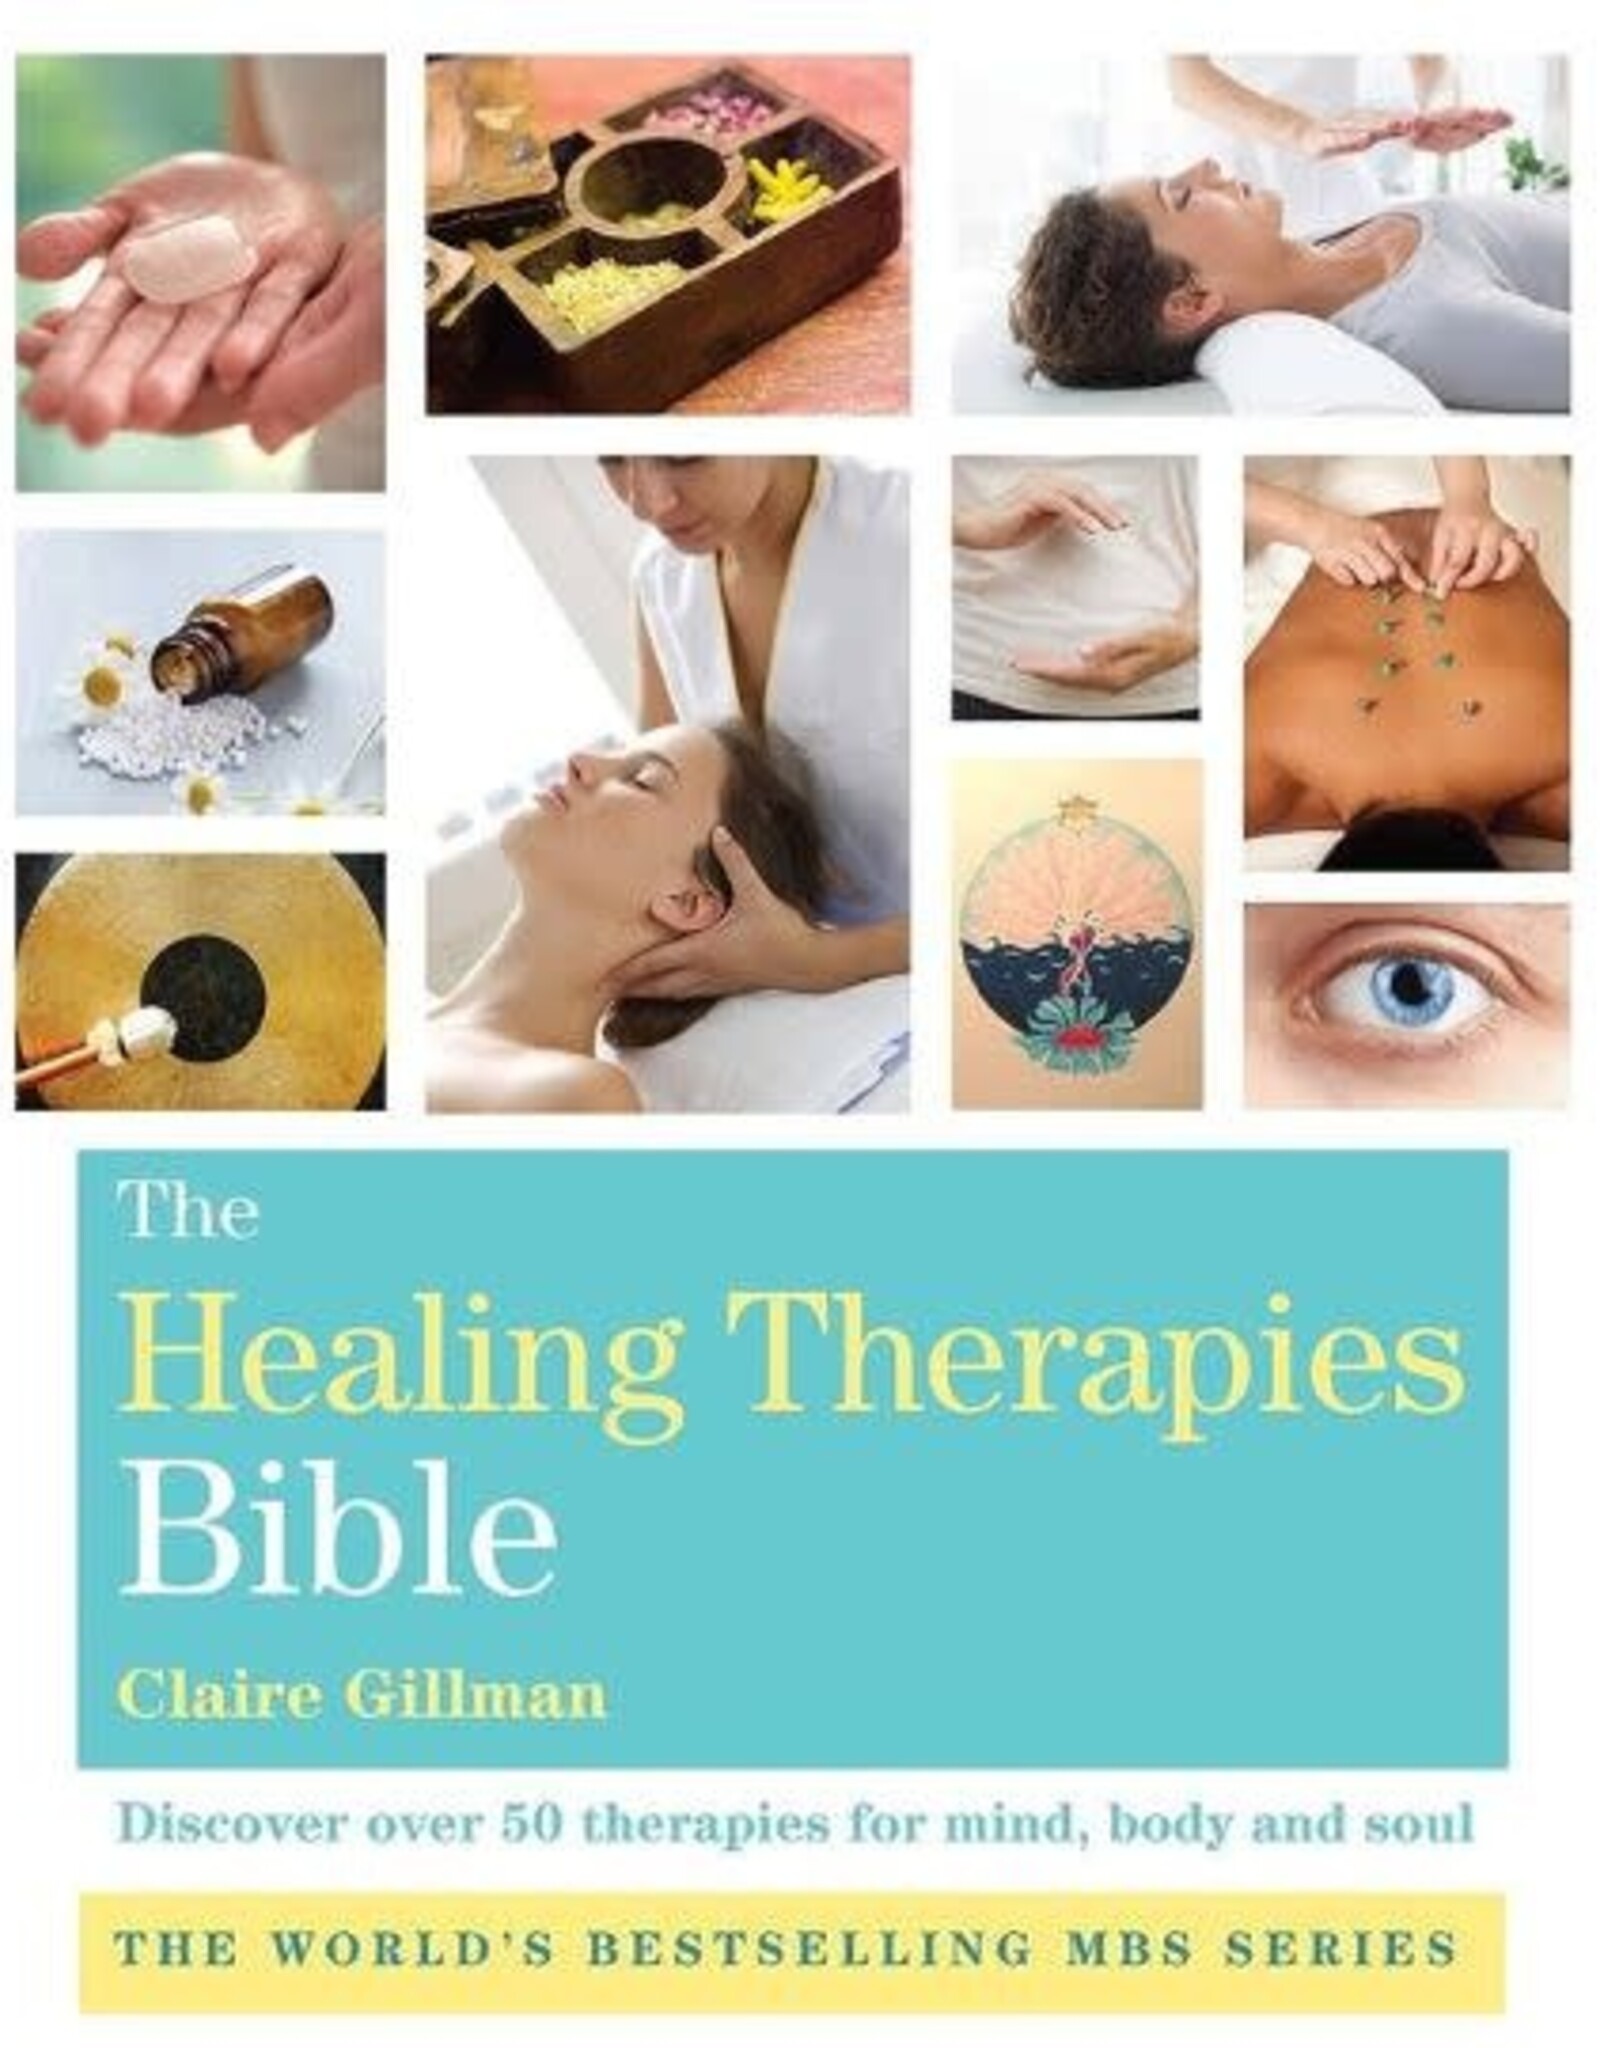 Claire Gillman Healing Therapies Bible by Claire Gillman